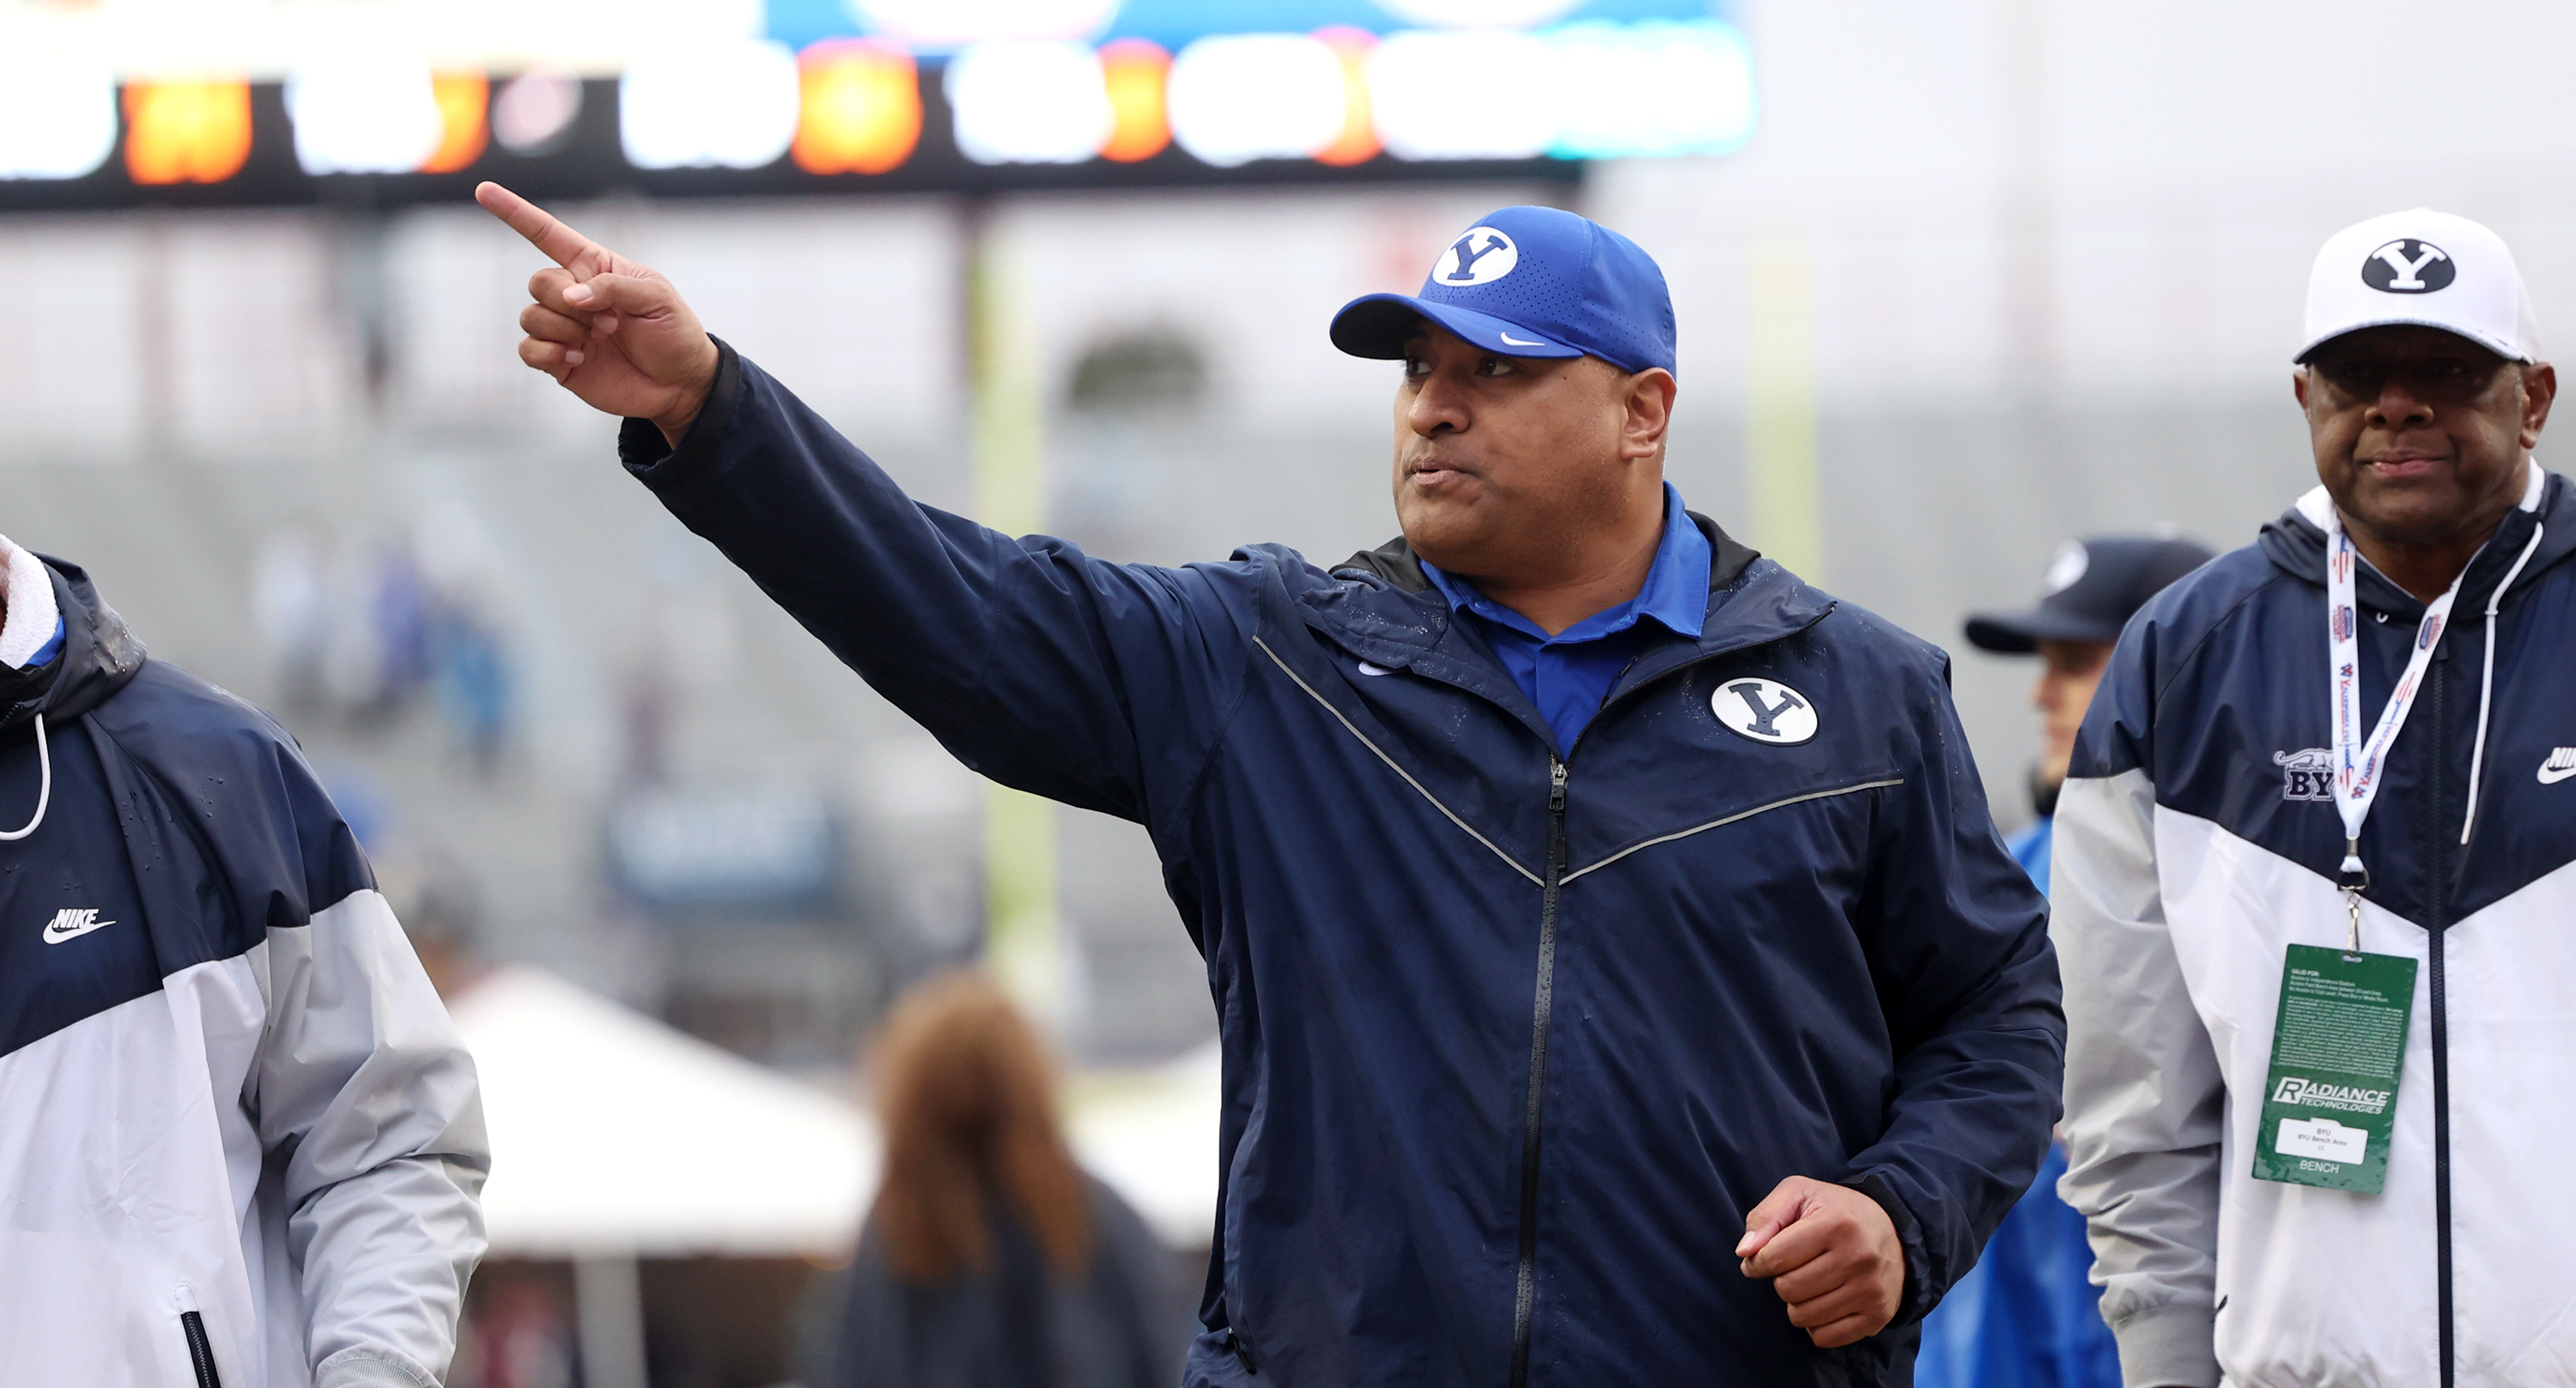 Brigham Young Cougars head coach Kalani Sitake waves to fans as he goes into the locker room.